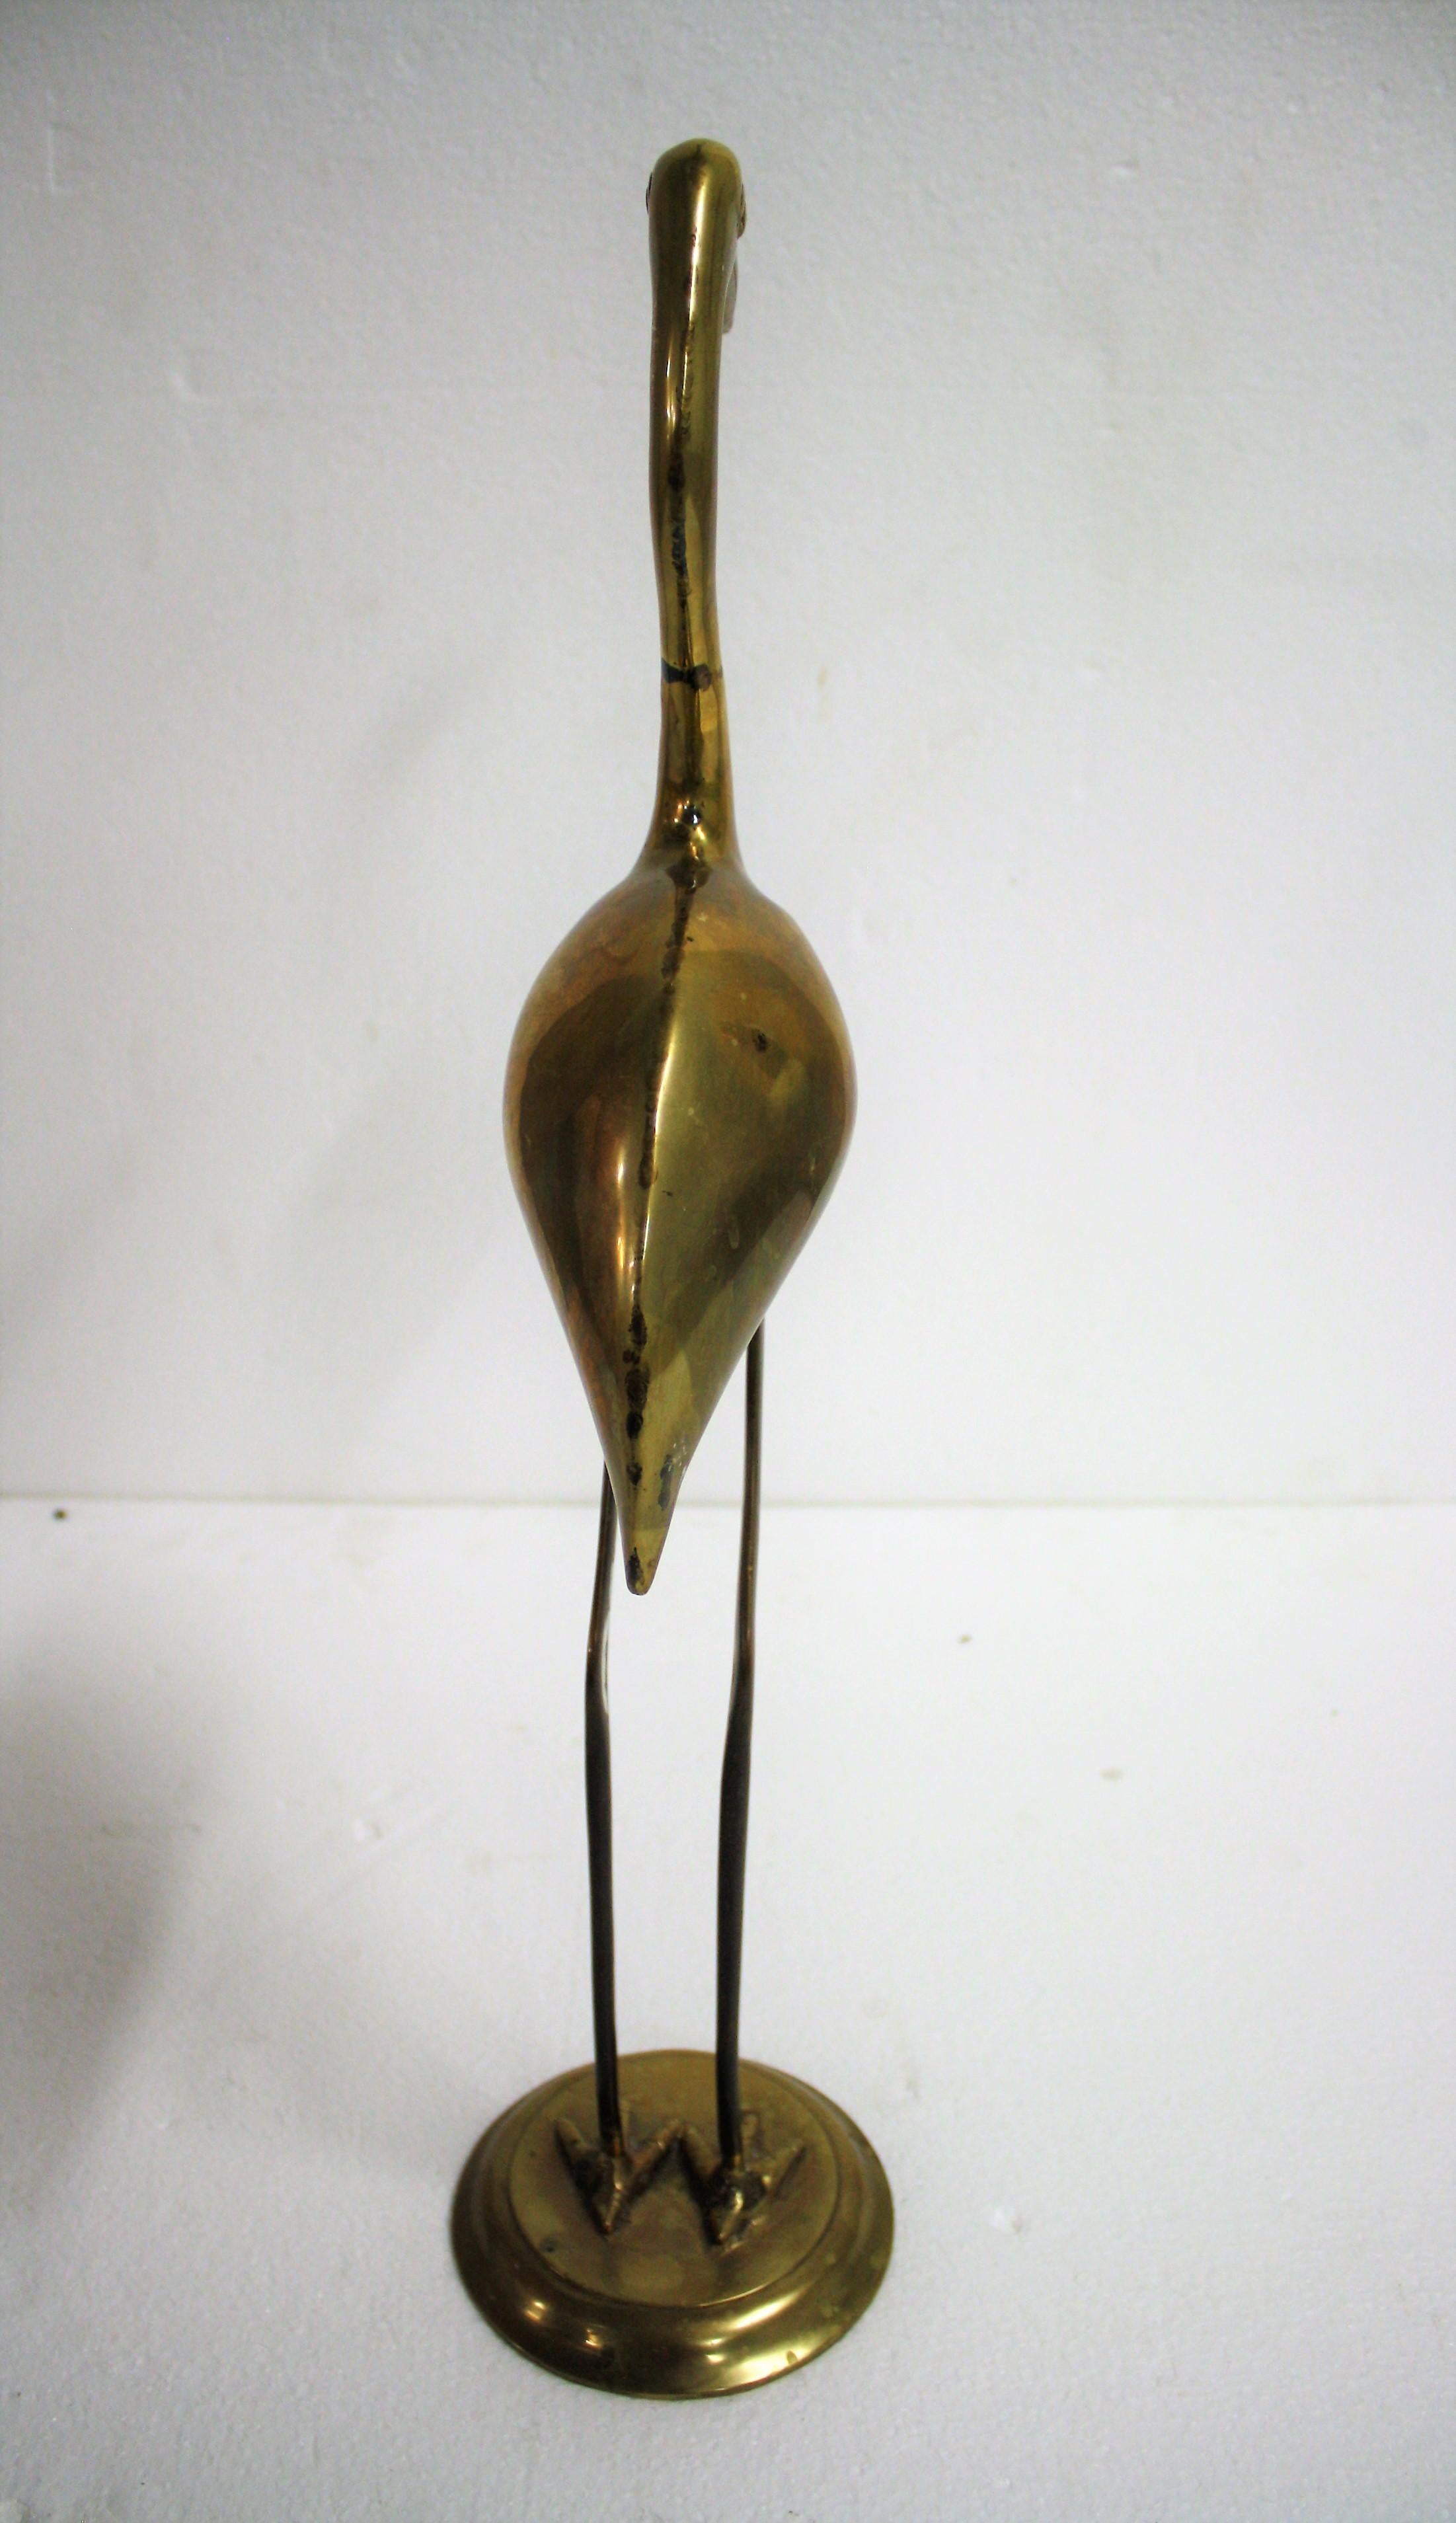 Midcentury brass crane bird sculpture.

Good original condition, slightly patinated which adds to the charm.

1970s, France

Good condition.

Dimensions:
Height 60cm/23.62